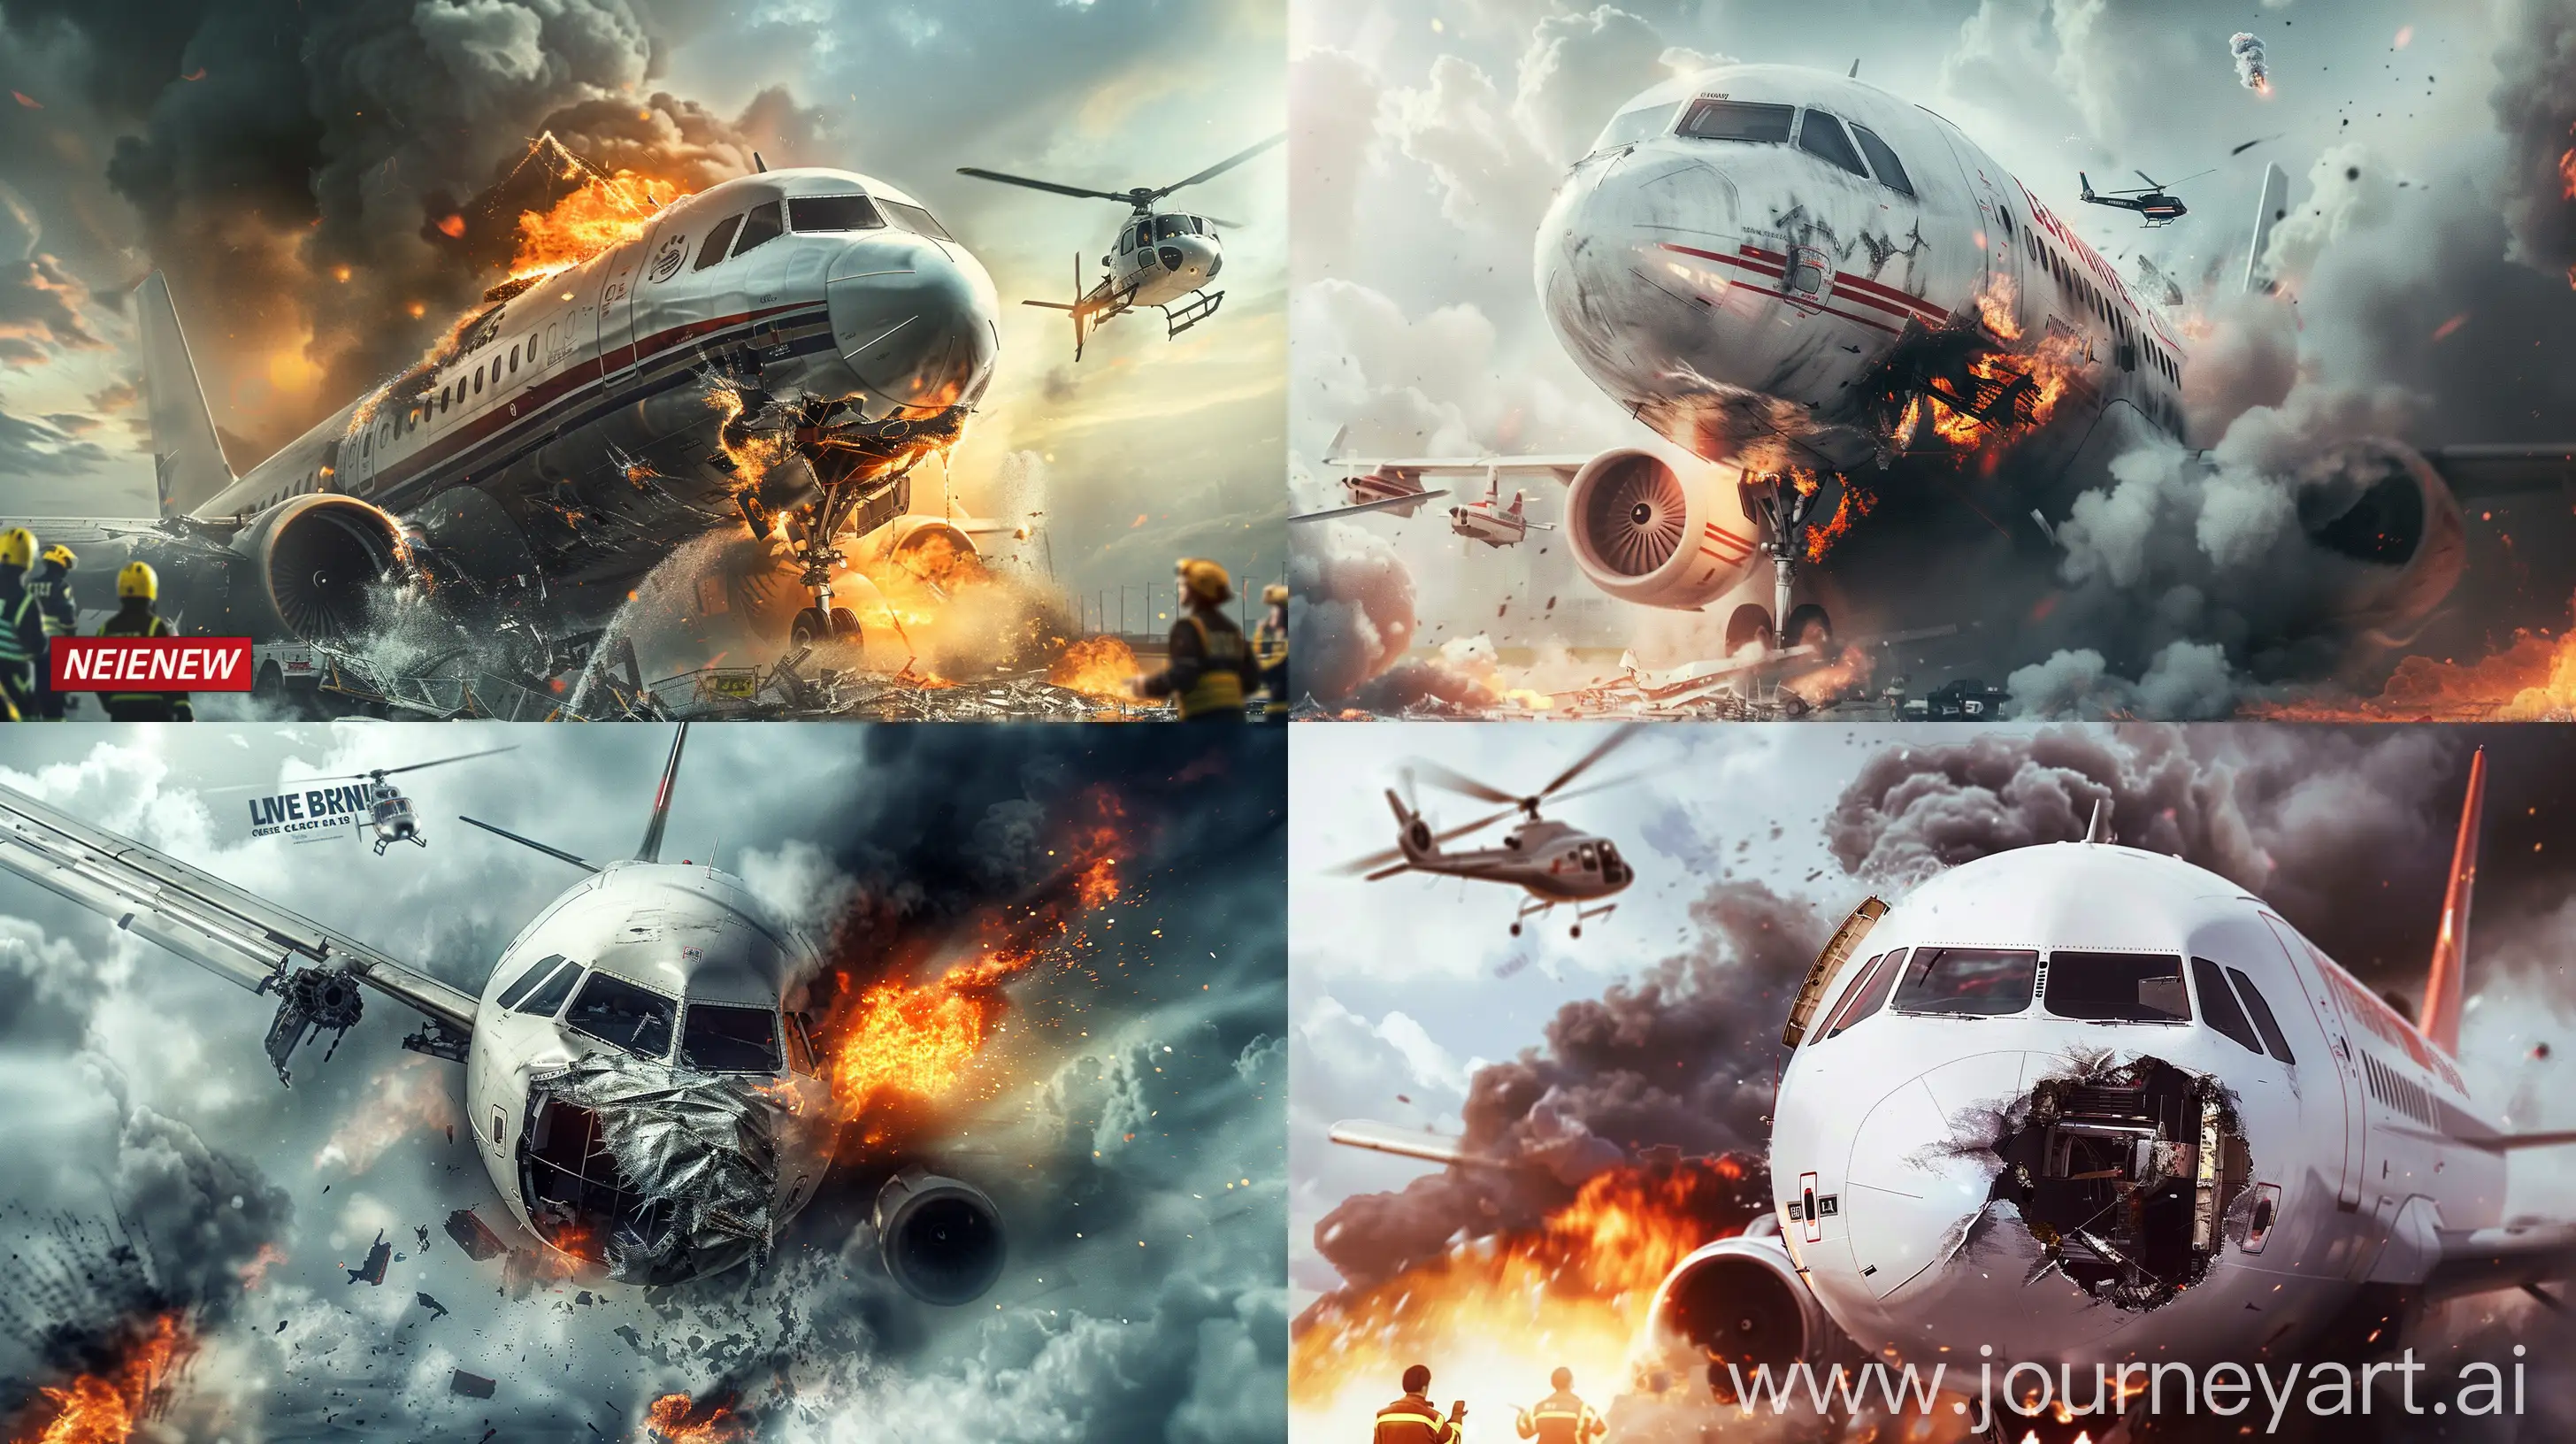 Airplane-Crash-Emergency-Chaotic-Scene-with-Flames-and-Emergency-Services